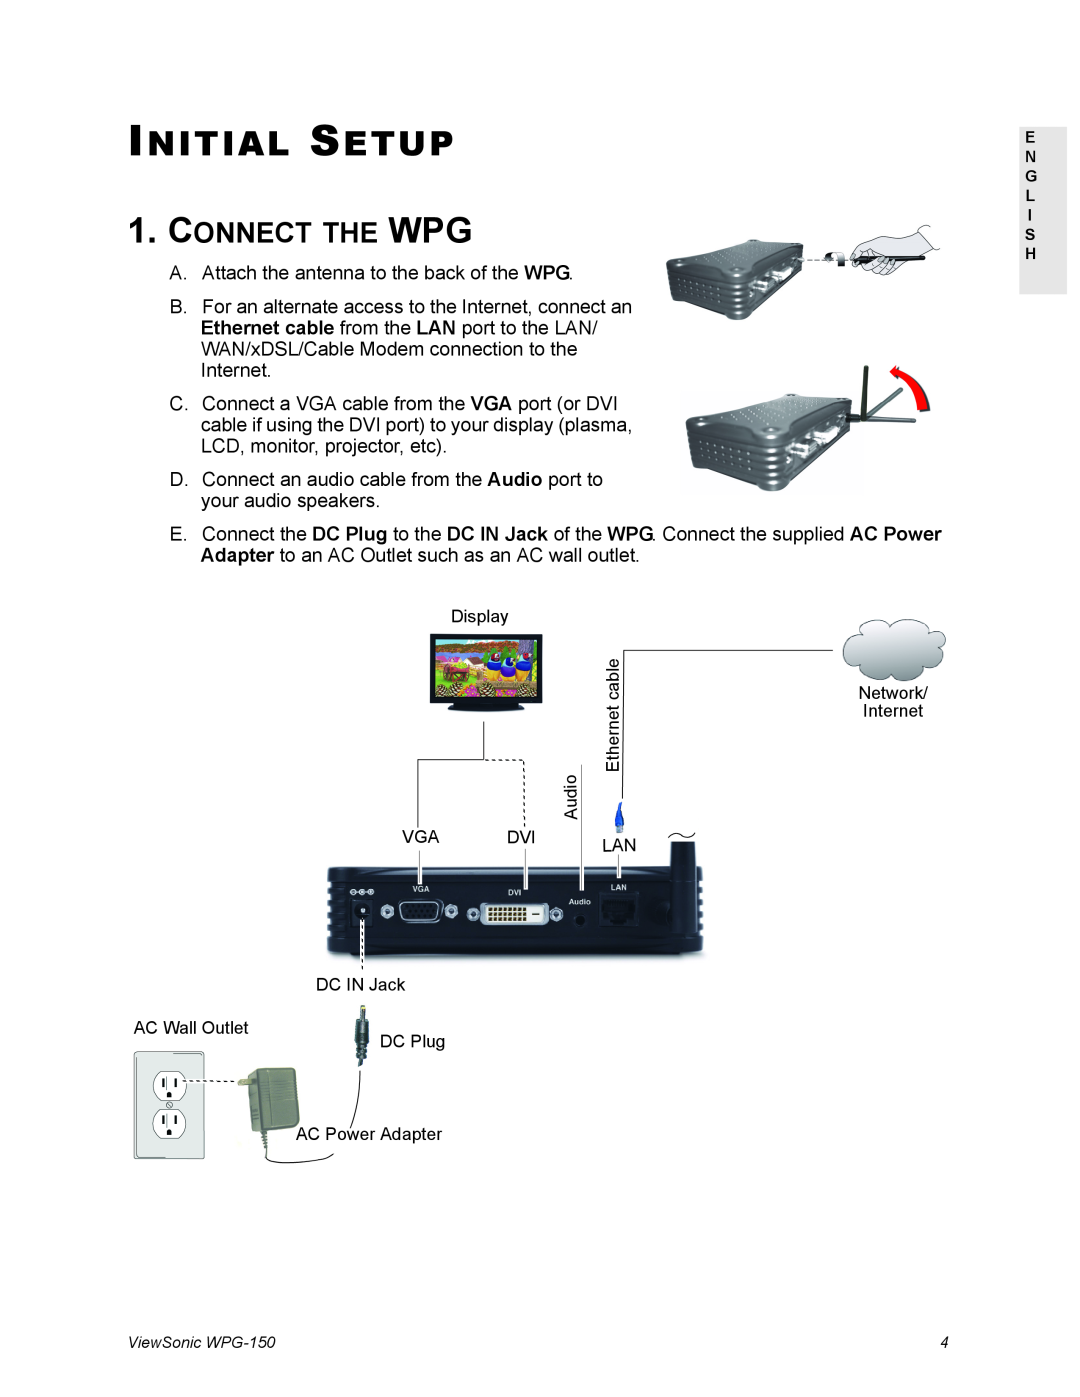 ViewSonic WPG-150 manual Initial Setup, Connect The Wpg 